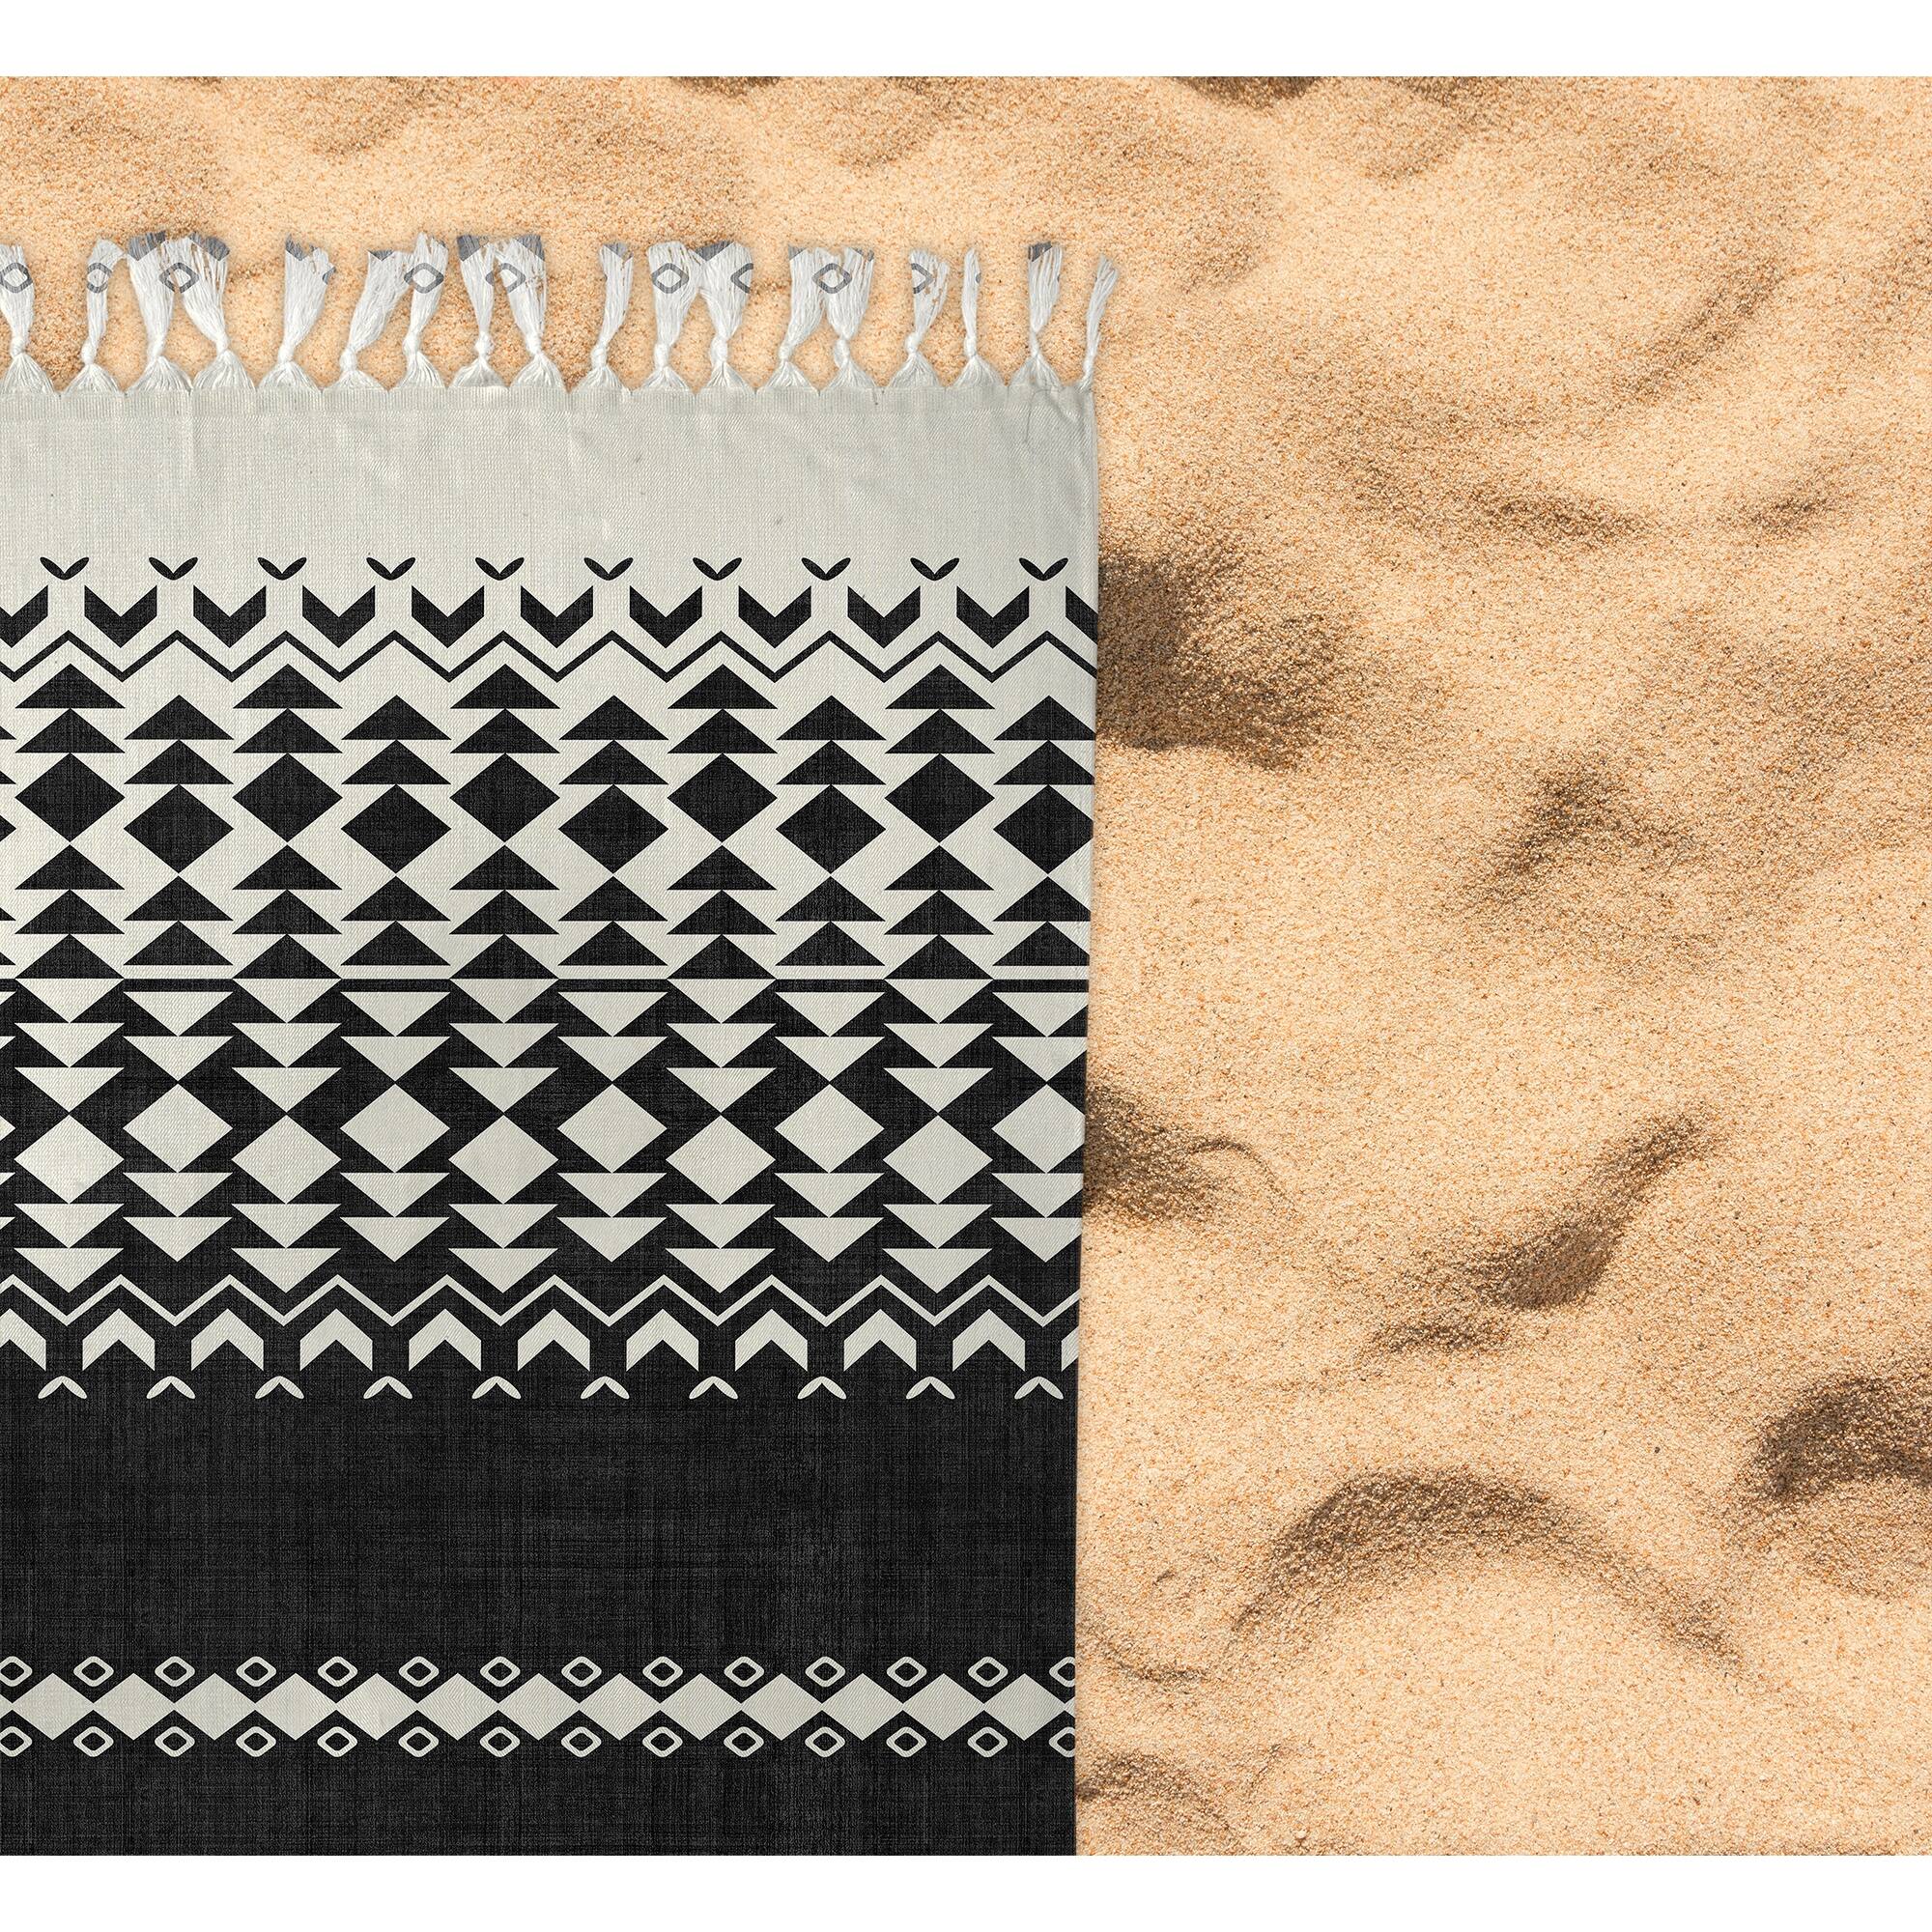 SOLLIA BLACK AND IVORY Beach Blanket with Tassels By Becky Bailey - 38 x 80